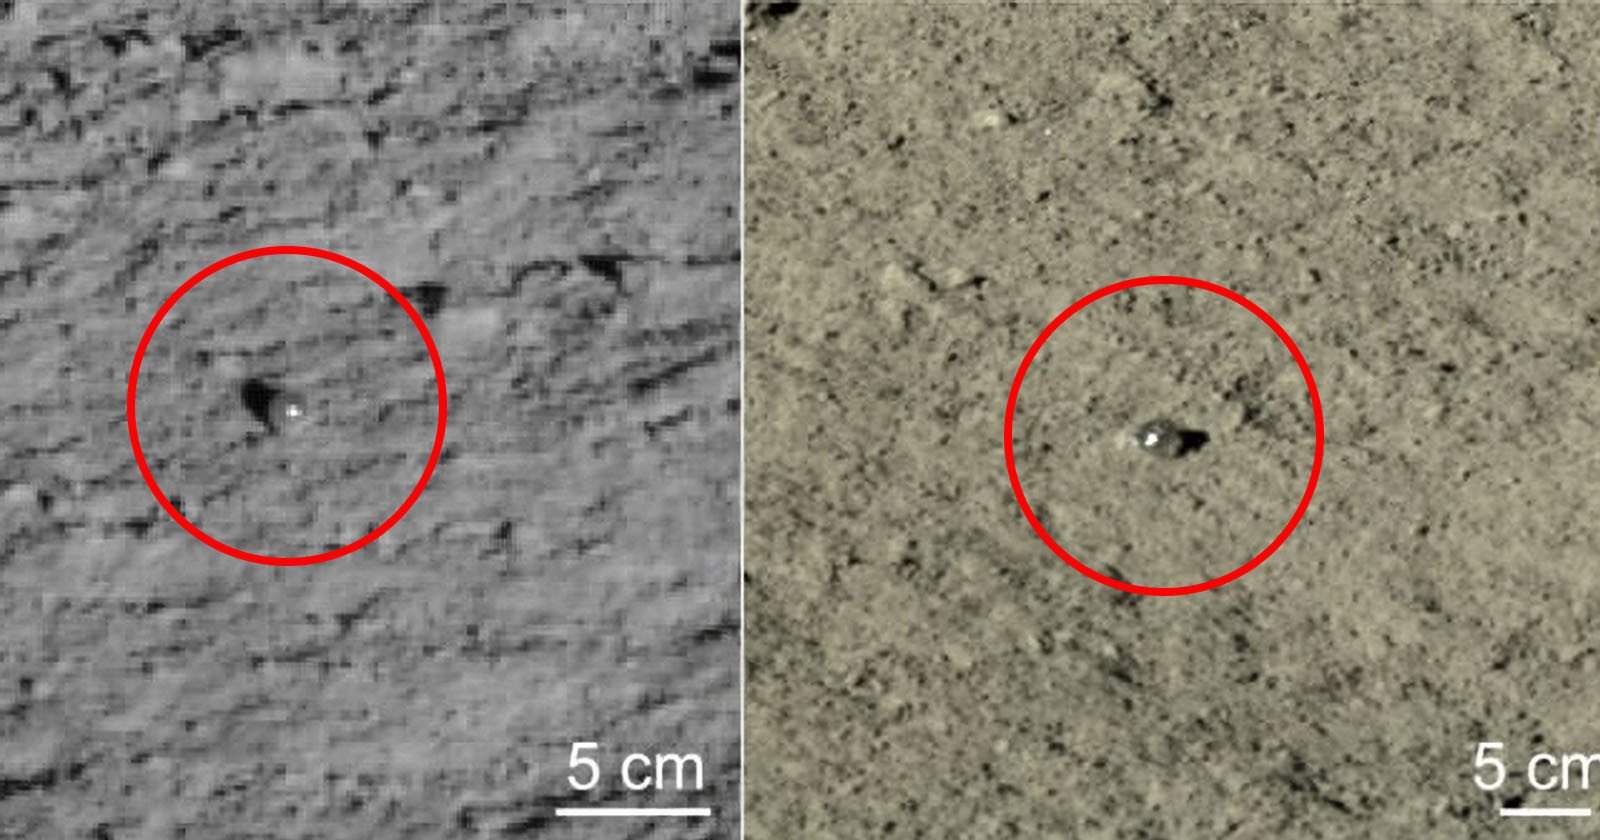 China Rover Photos Show Glass Orbs on Far Side of the Moon